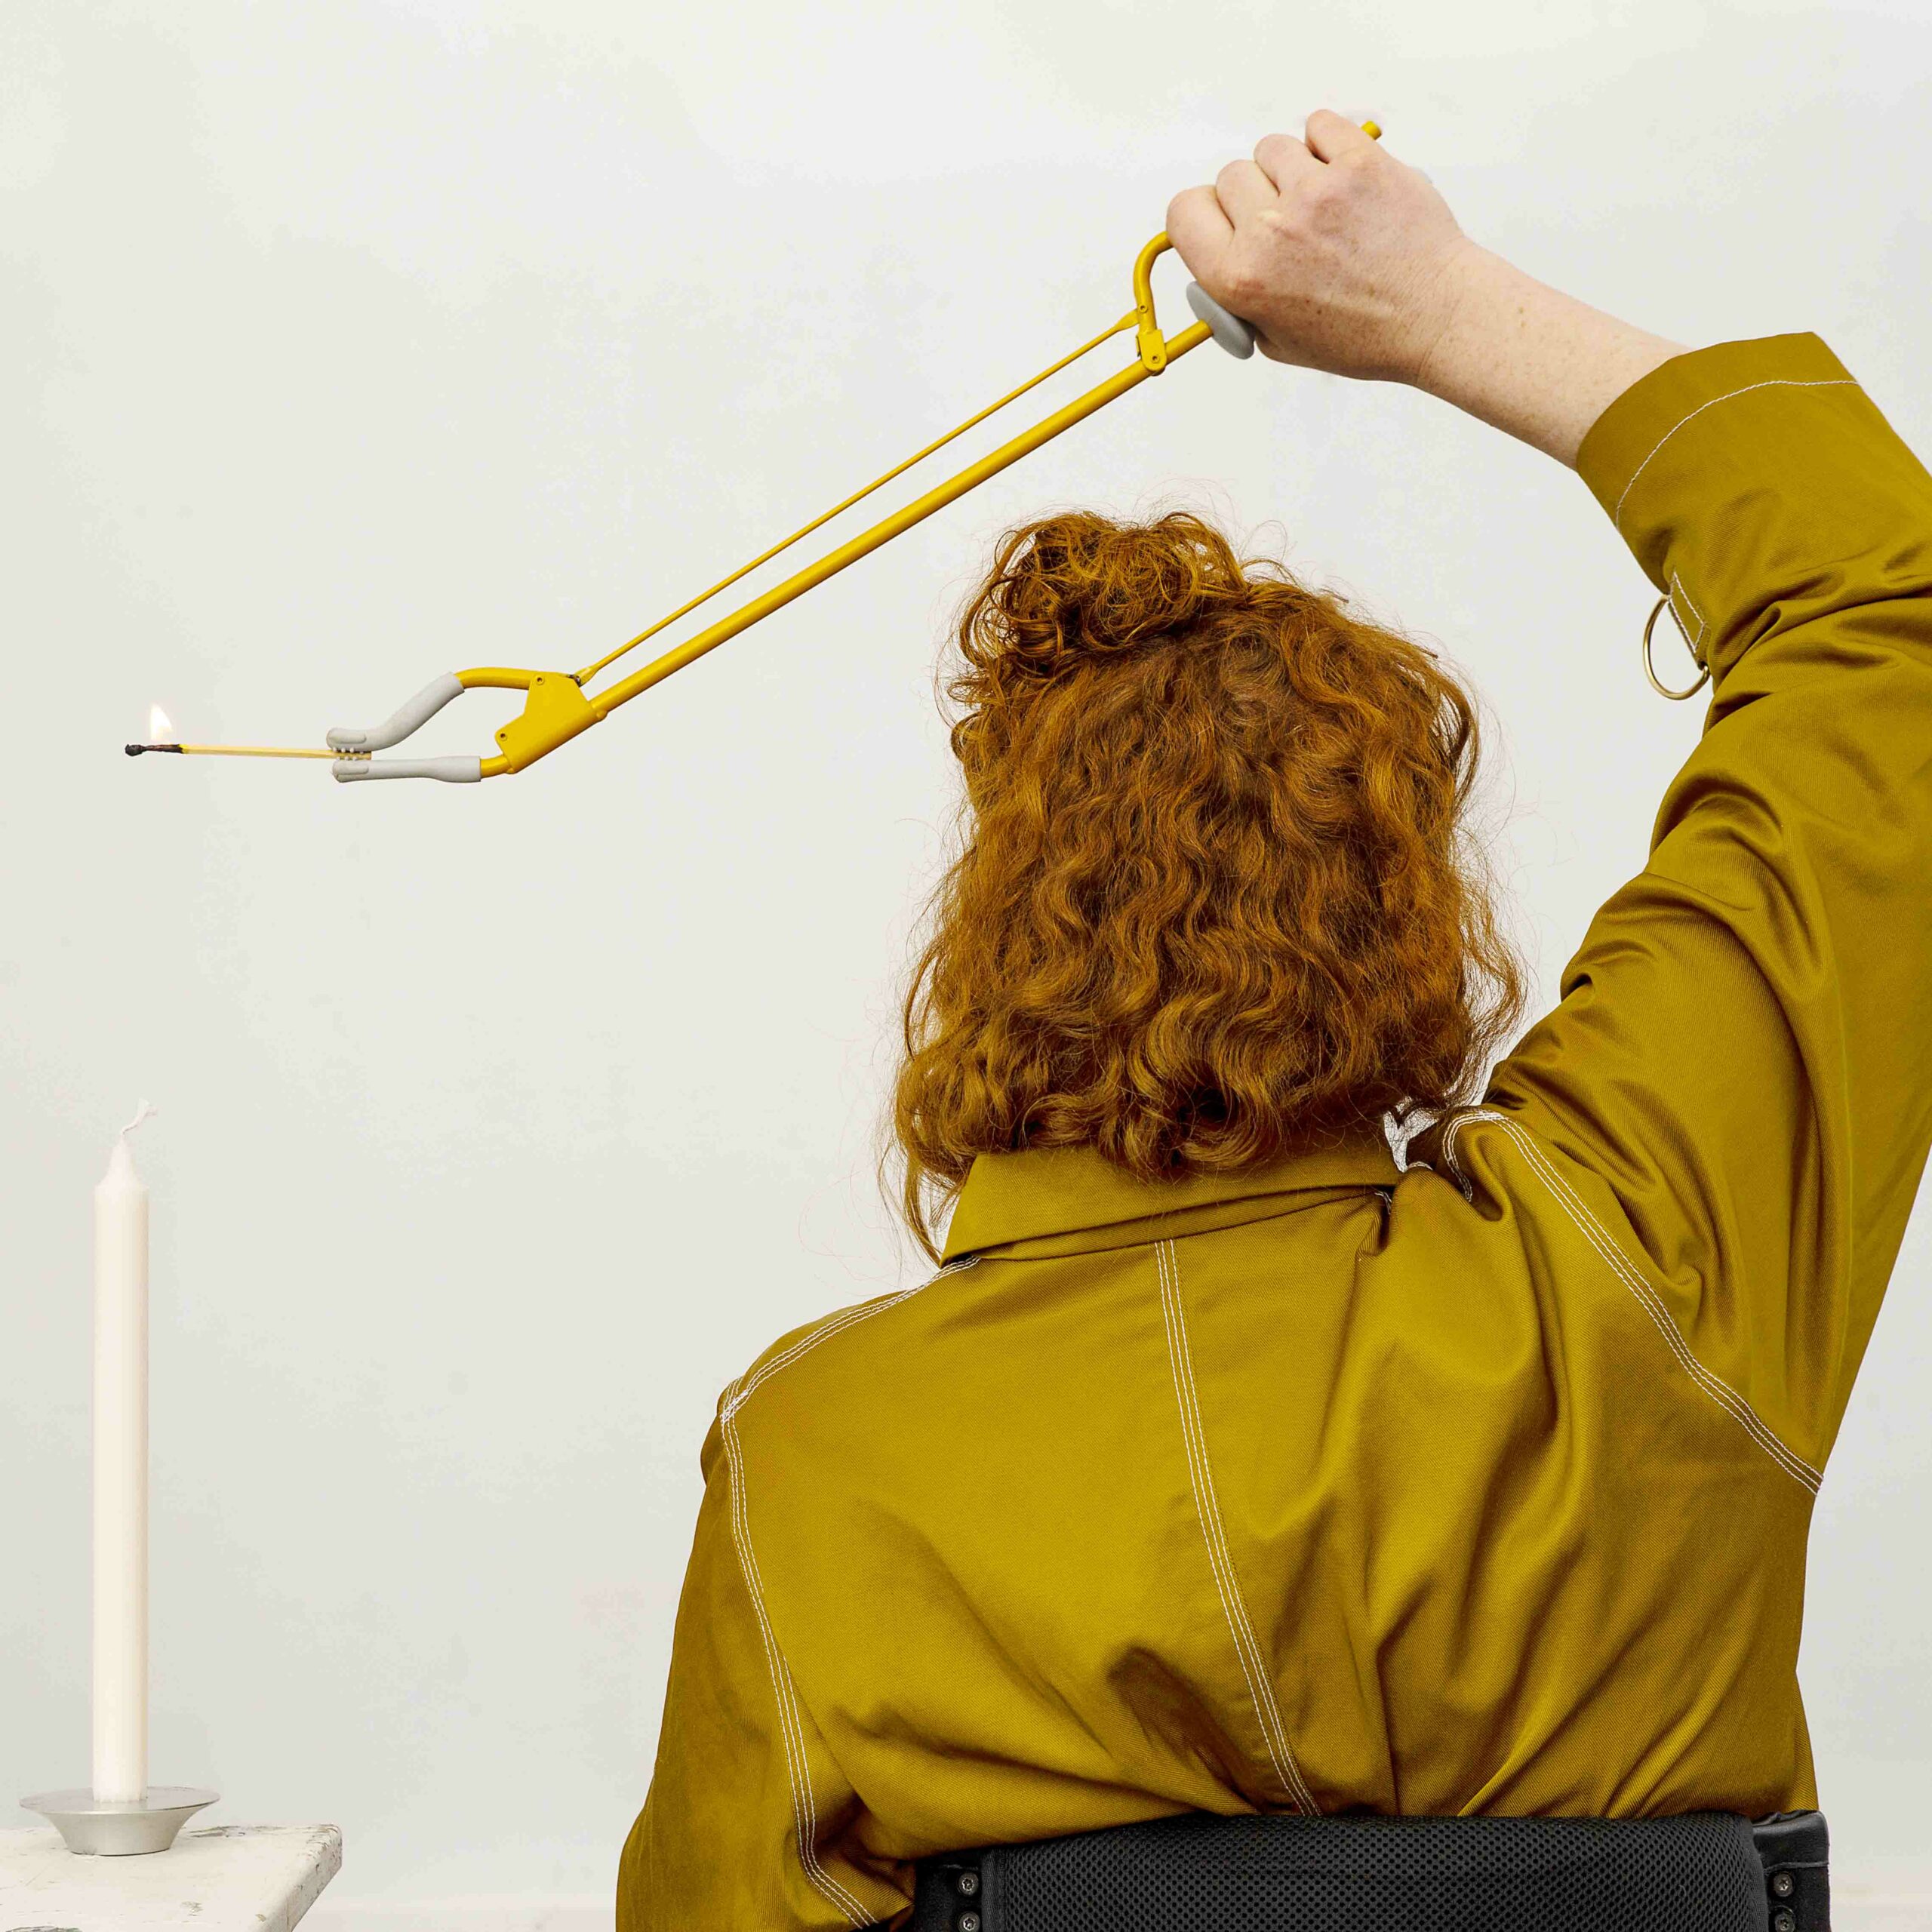 The motion depicts a person with red hair sitting with their back to us, wearing a mustard yellow shirt. In their hand holds a yellow gripper. In the gripper is a lit match above a candle. Photo: Lars Dyrendom